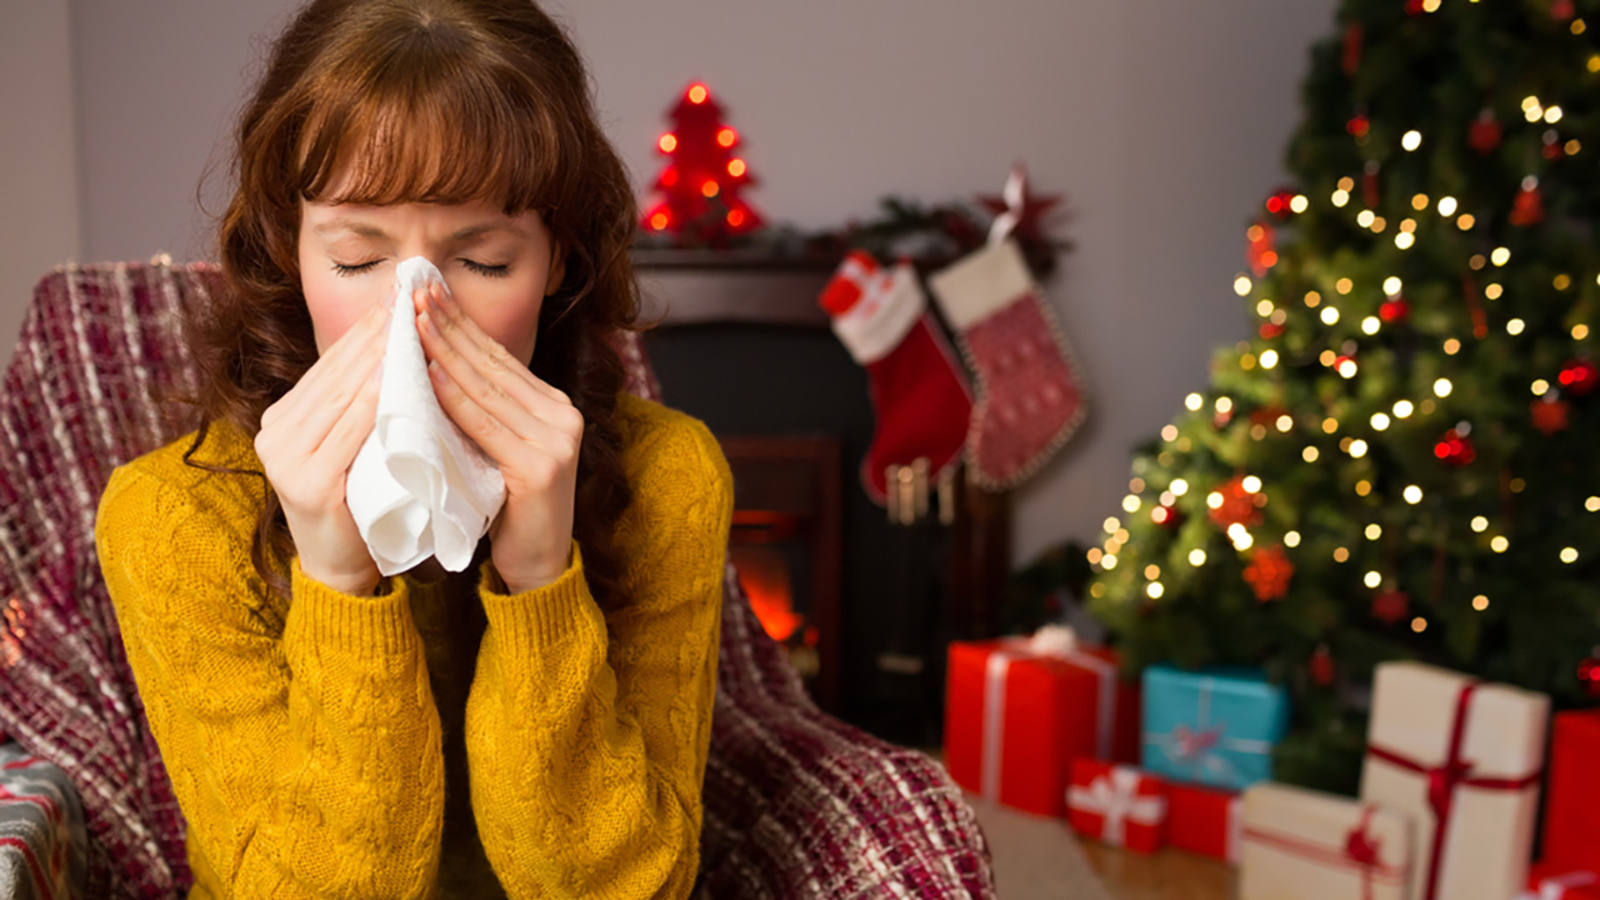 Allergies at Christmas. What to look out for during the festive season.